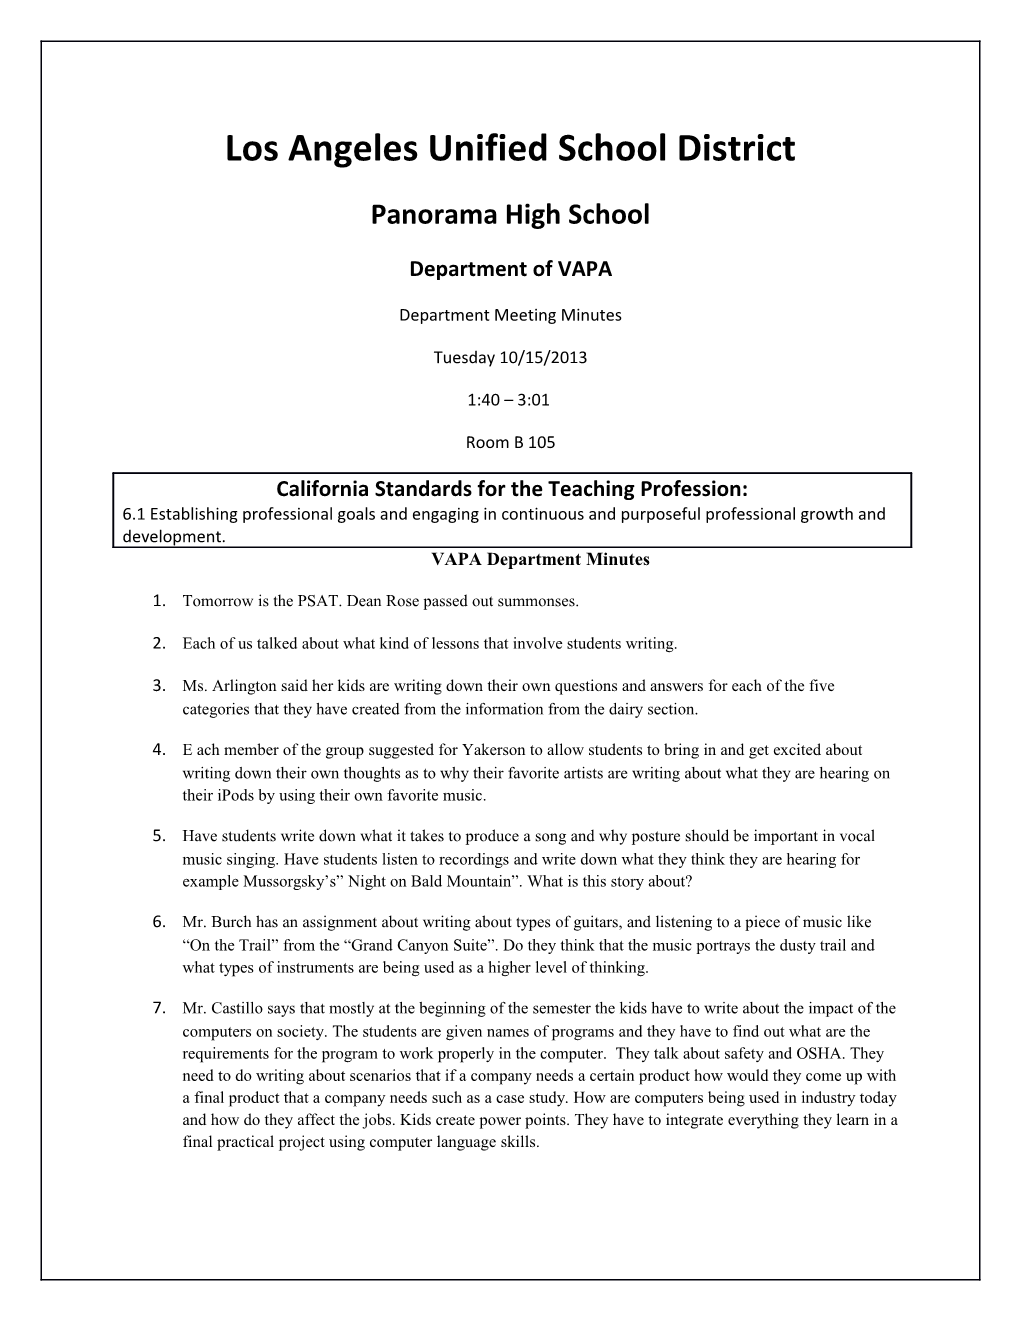 Los Angeles Unified School District s26